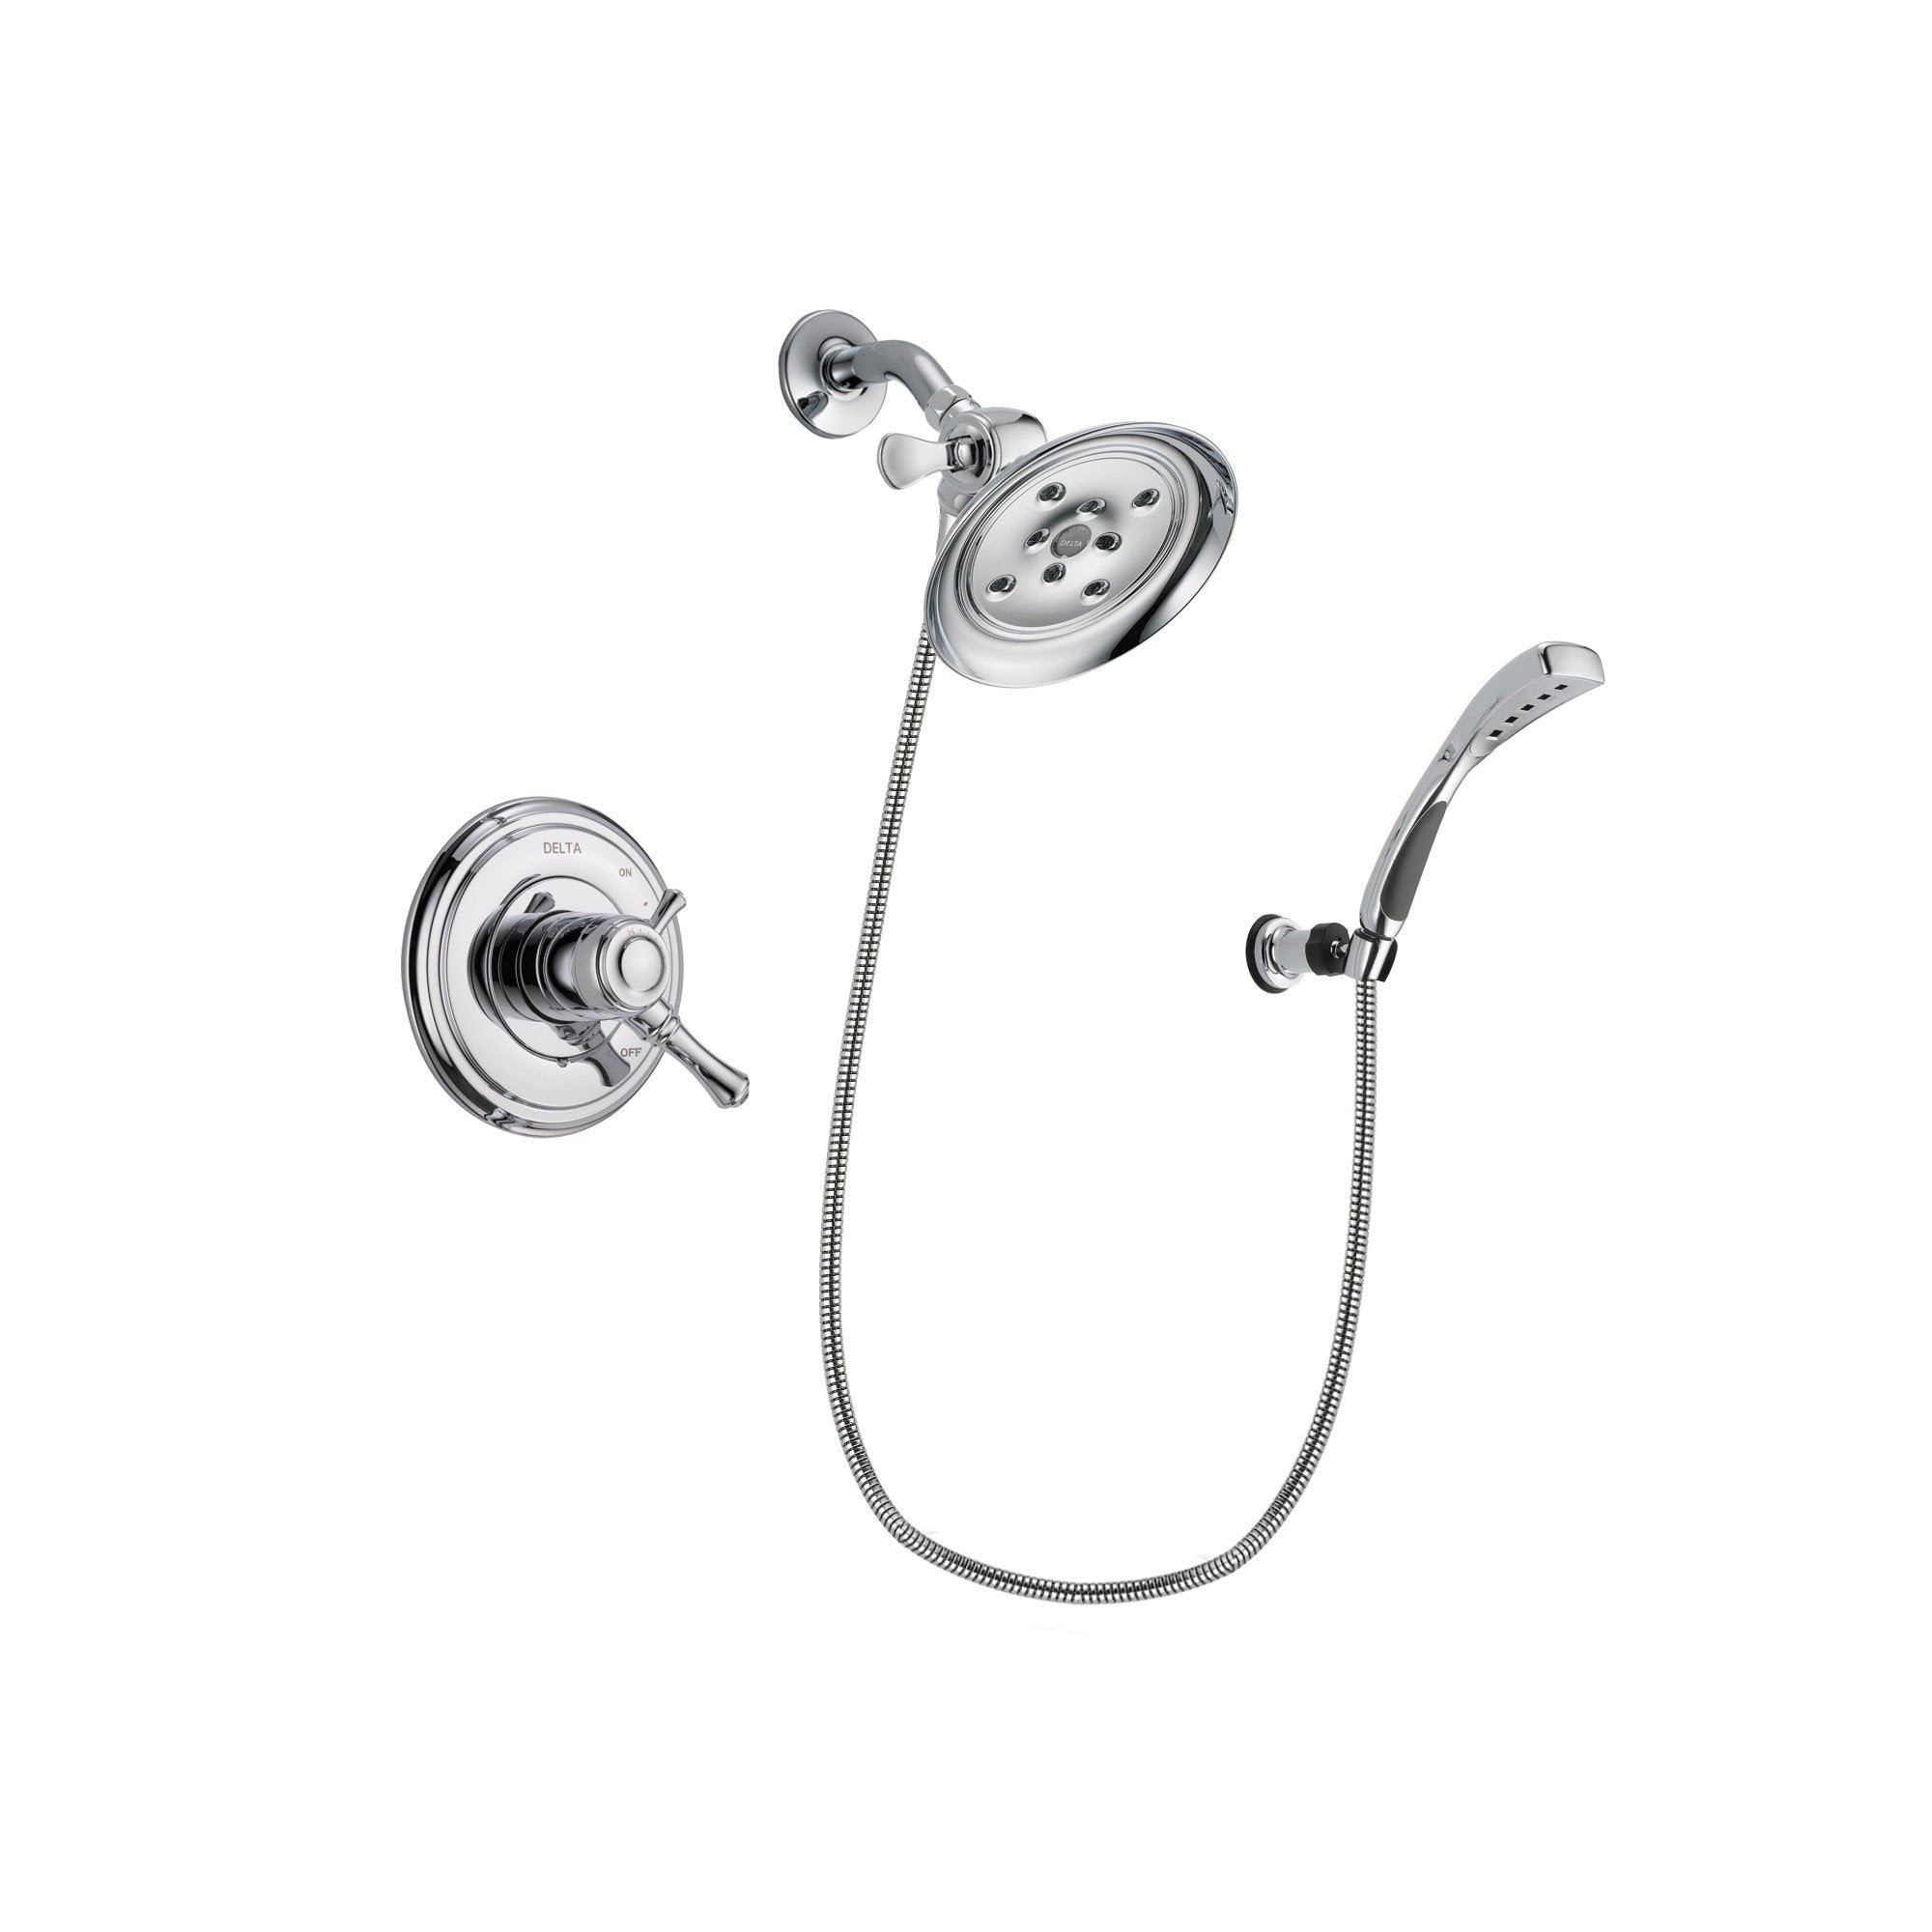 Delta Cassidy Chrome Finish Dual Control Shower Faucet System Package with Large Rain Showerhead and Wall-Mount Bracket with Handheld Shower Spray Includes Rough-in Valve DSP1070V